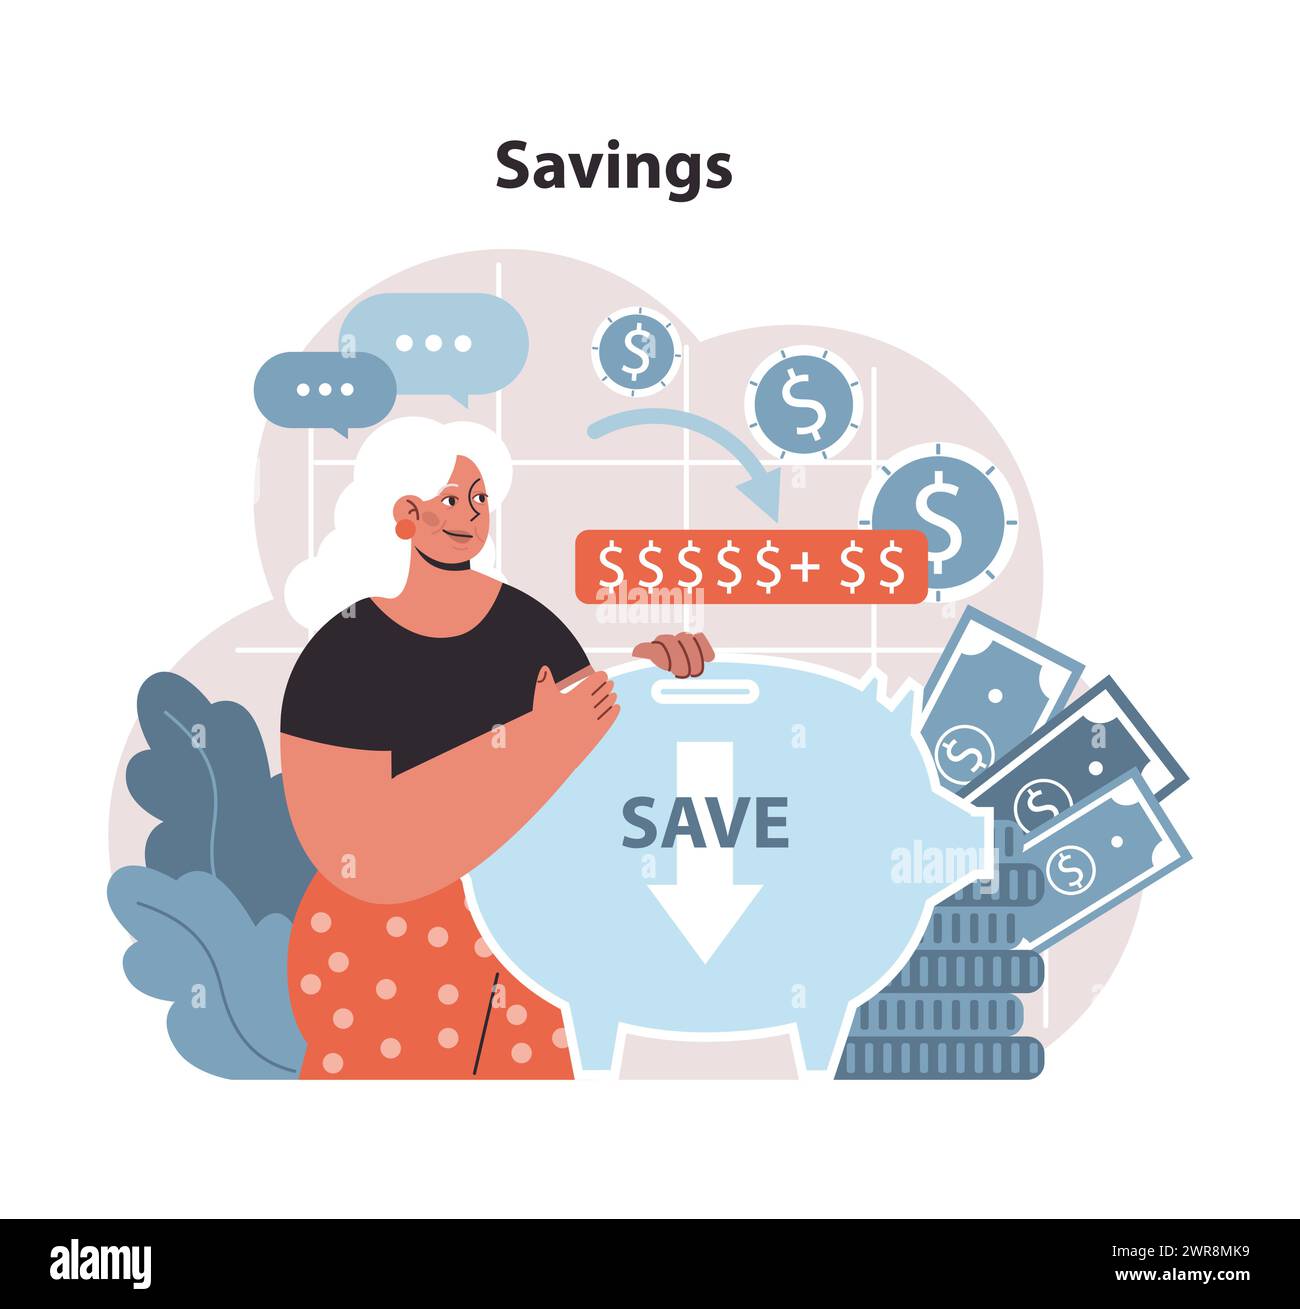 Savings Strategy Concept. Smart deposit habits leading to significant nest egg growth. Cultivating financial resilience. Flat vector illustration. Stock Vector